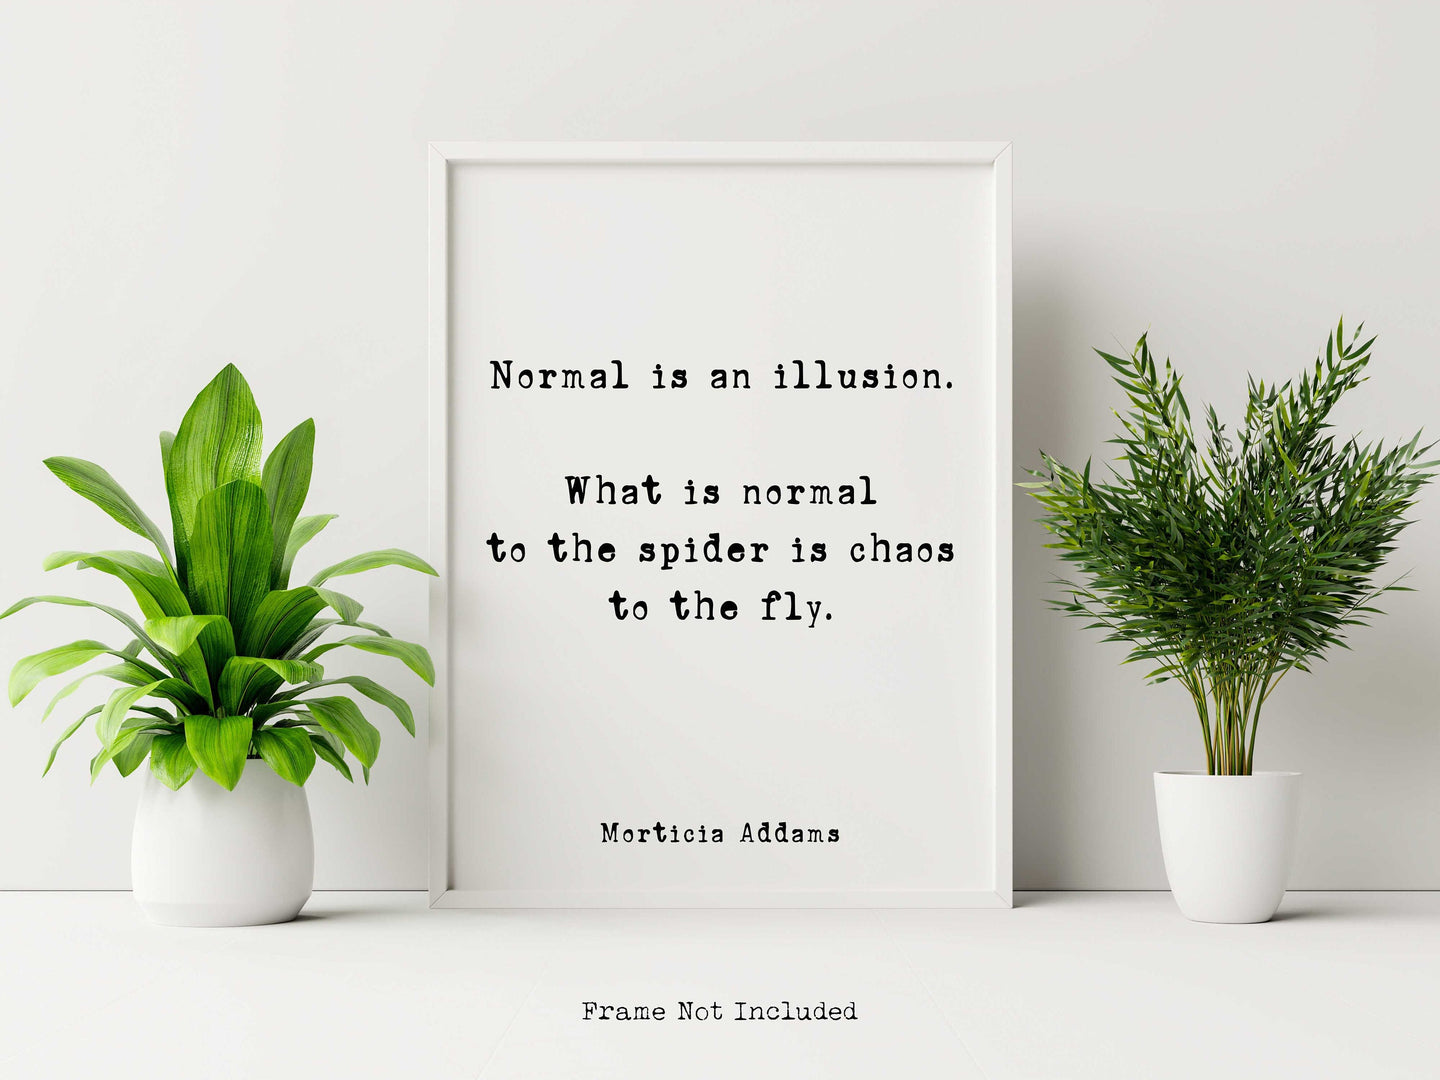 The Addams Family Movie Quote Print - Normal is an illusion - Halloween Decor - Spooky Poster Print